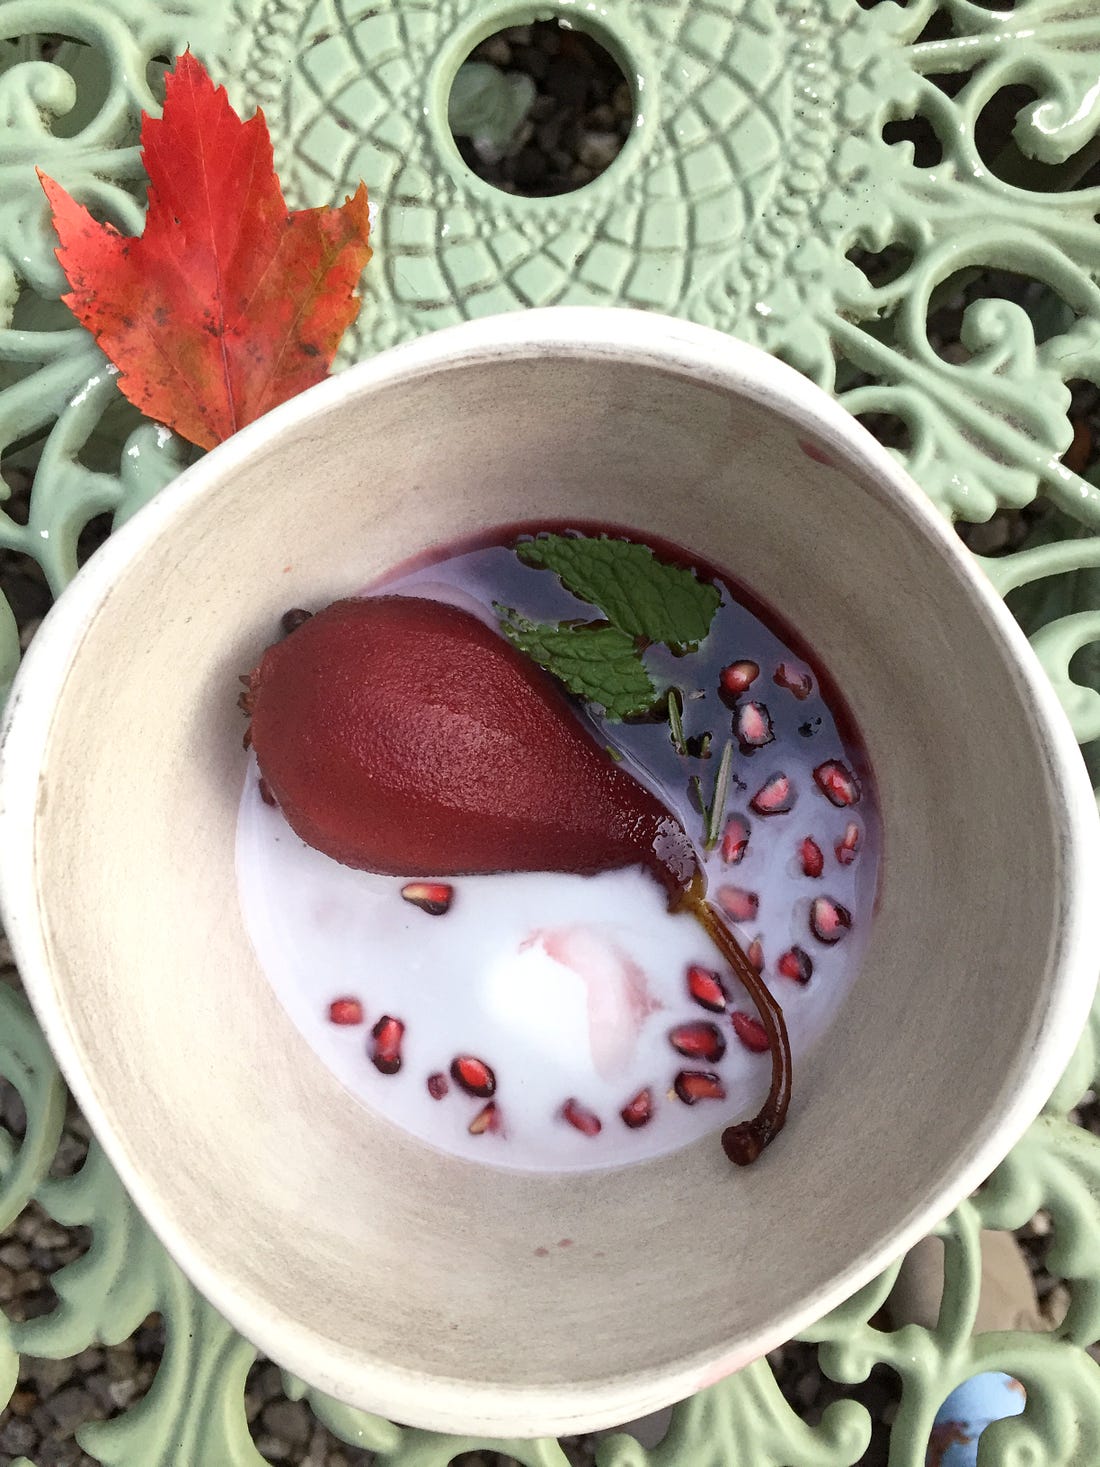 On an outdoor table, a small white bowl sits with a maple leaf at its upper corner. In the bowl is a dark red poached pear sitting in wine an coconut cream with pomegranate seeds flecked throughout, and mint and rosemary at the edge of the bowl.